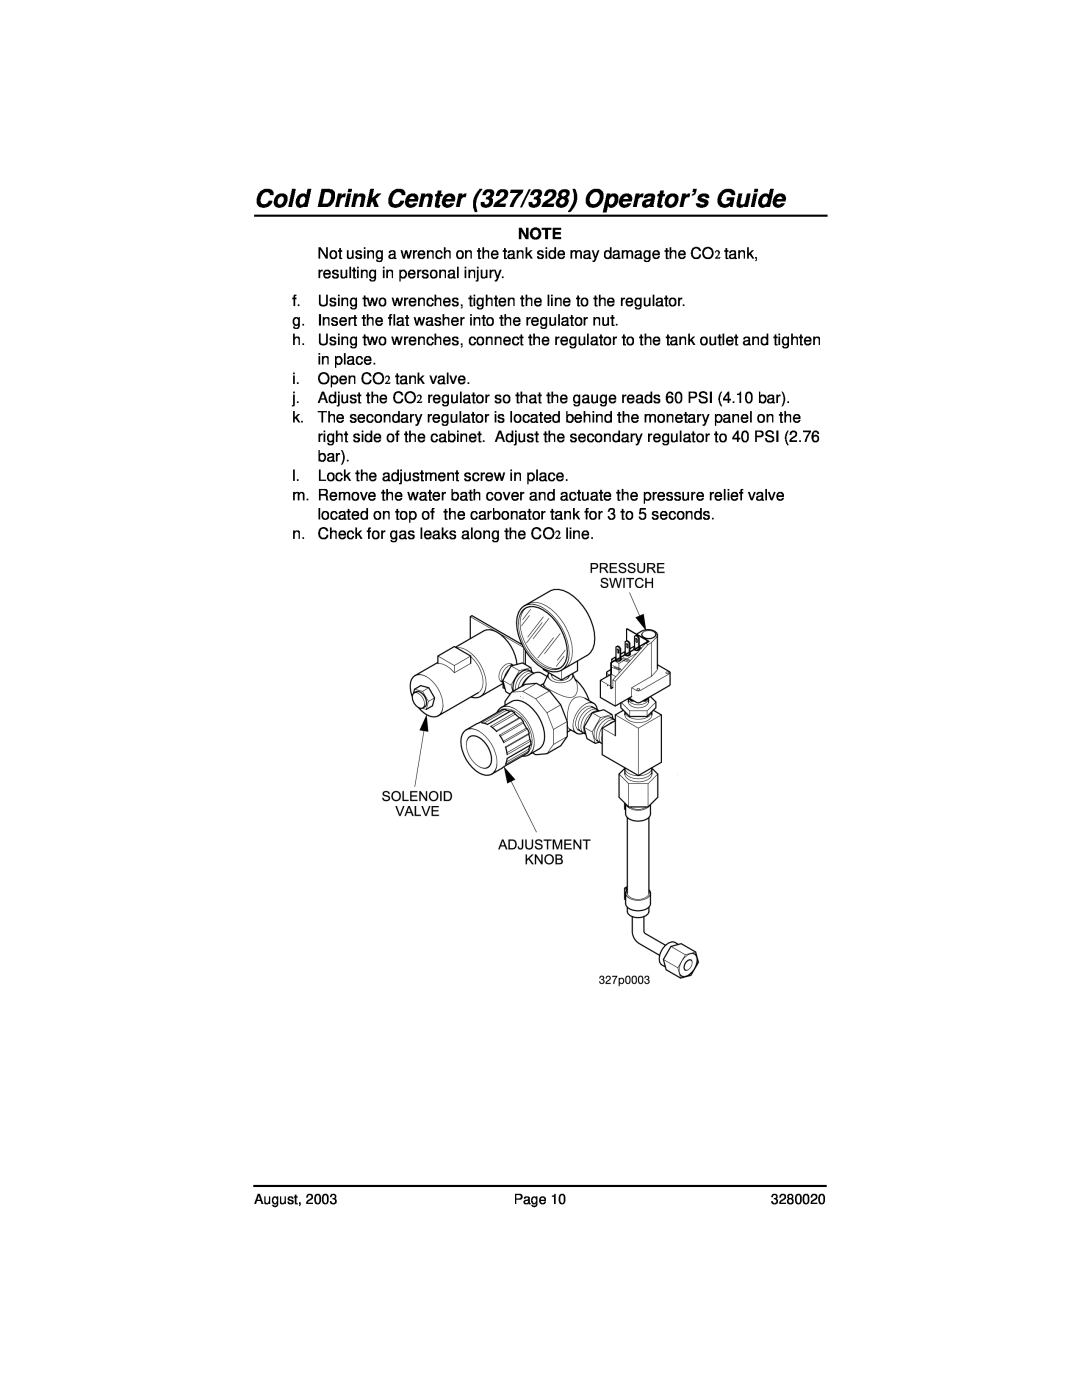 Everpure 325 manual Cold Drink Center 327/328 Operator’s Guide, g.Insert the flat washer into the regulator nut 